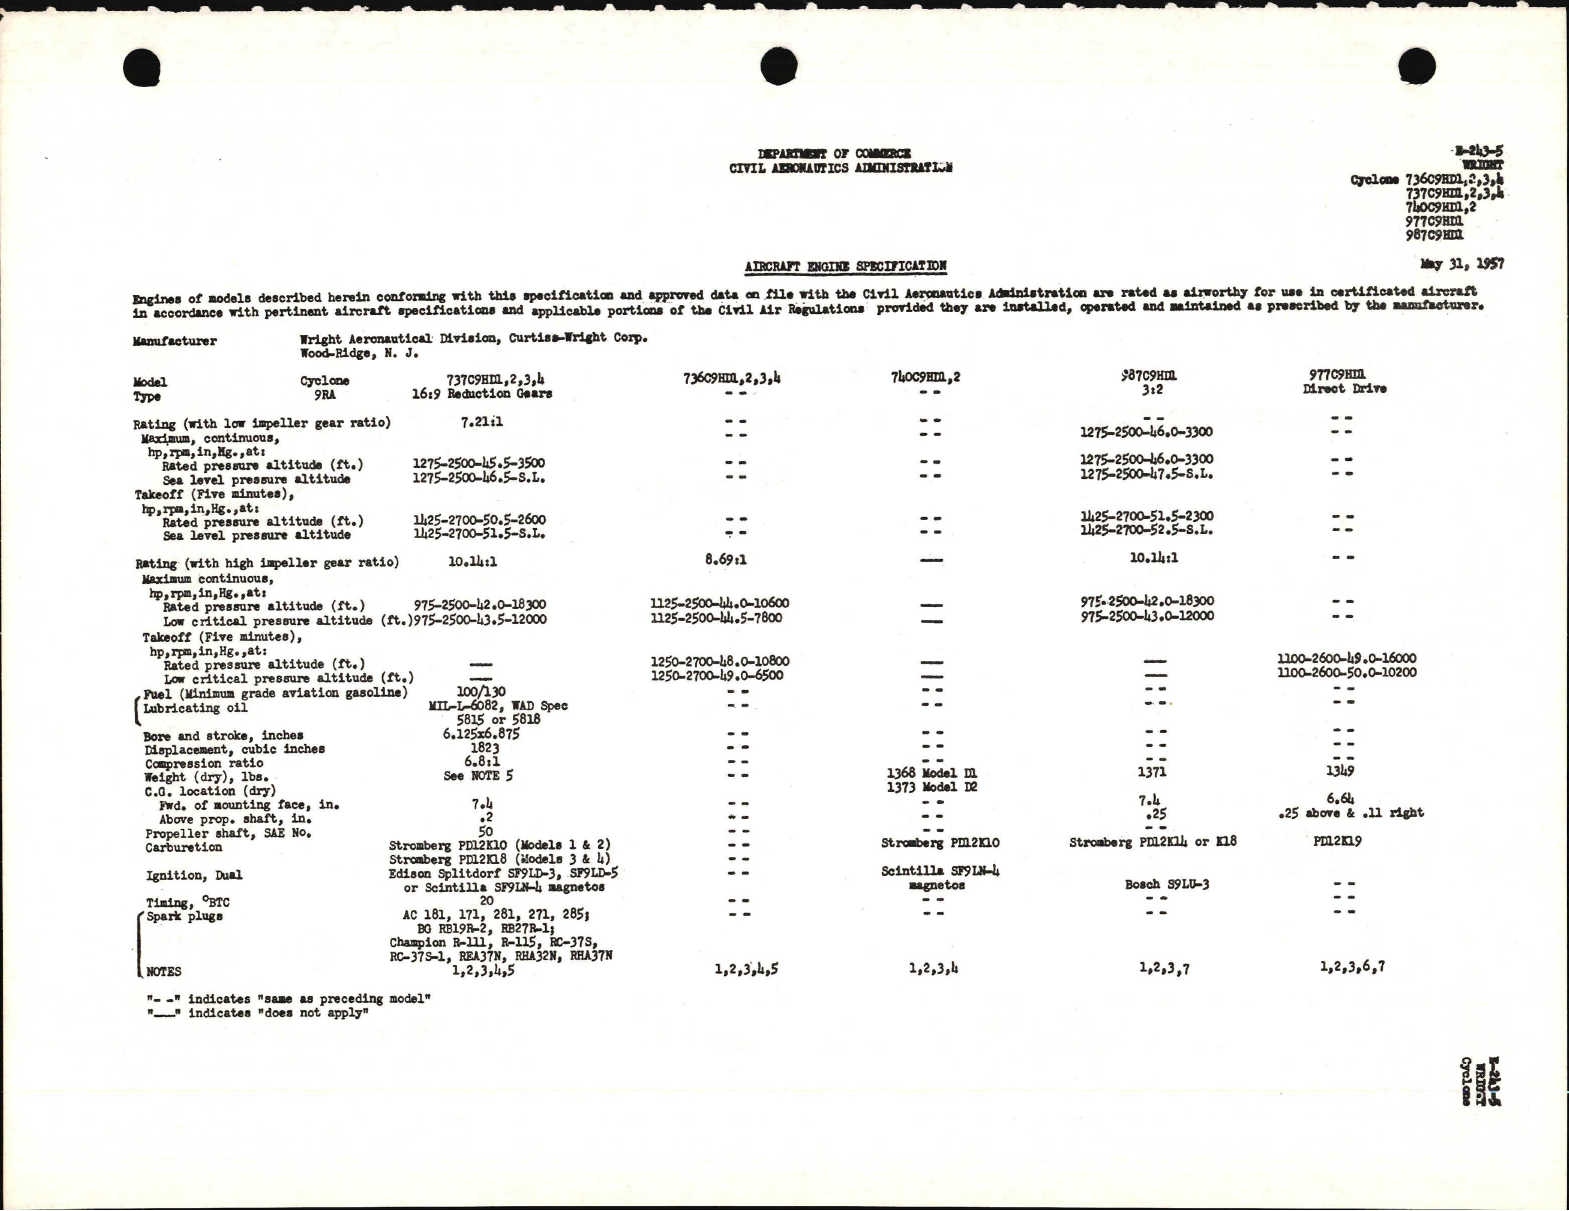 Sample page 1 from AirCorps Library document: 736C9HD, 737C9HD, 740C9HD, 977C9HD1, 987C9HD1 Cyclone